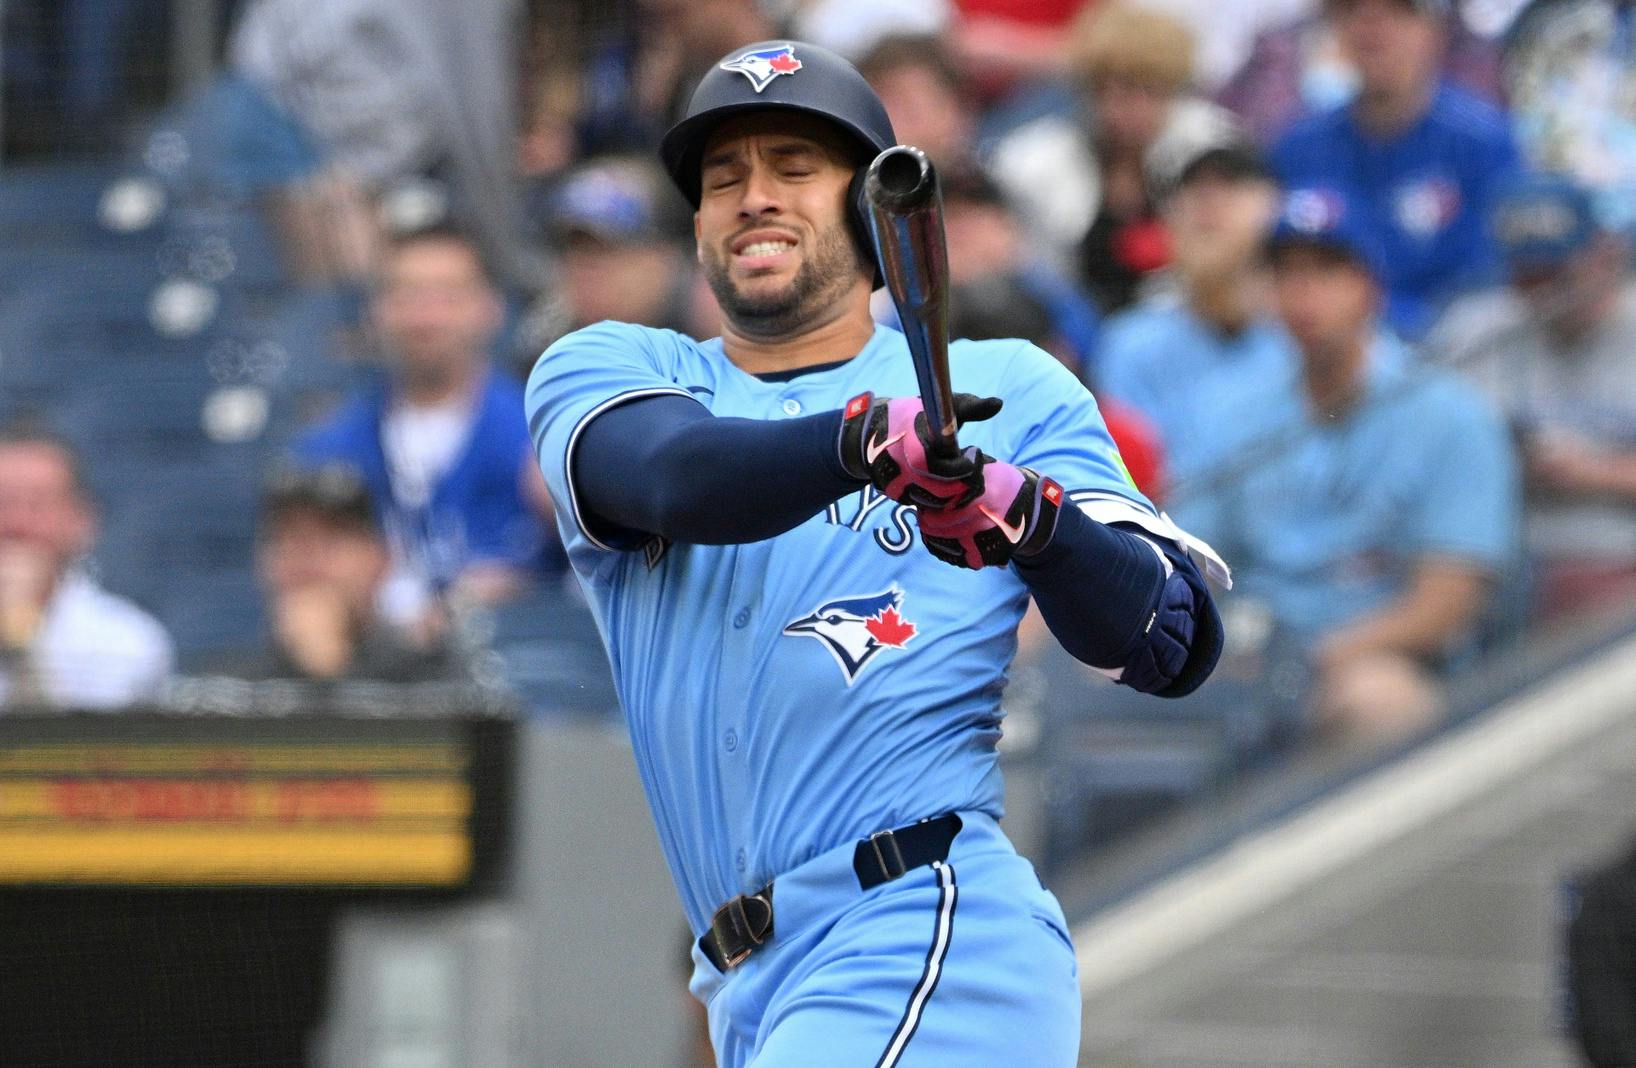 Toronto Blue Jays right fielder George Springer (4) hits a foul ball against the Minnesota in the first inning at Rogers Centre. Mandatory Credit: Dan Hamilton-USA TODAY Sports